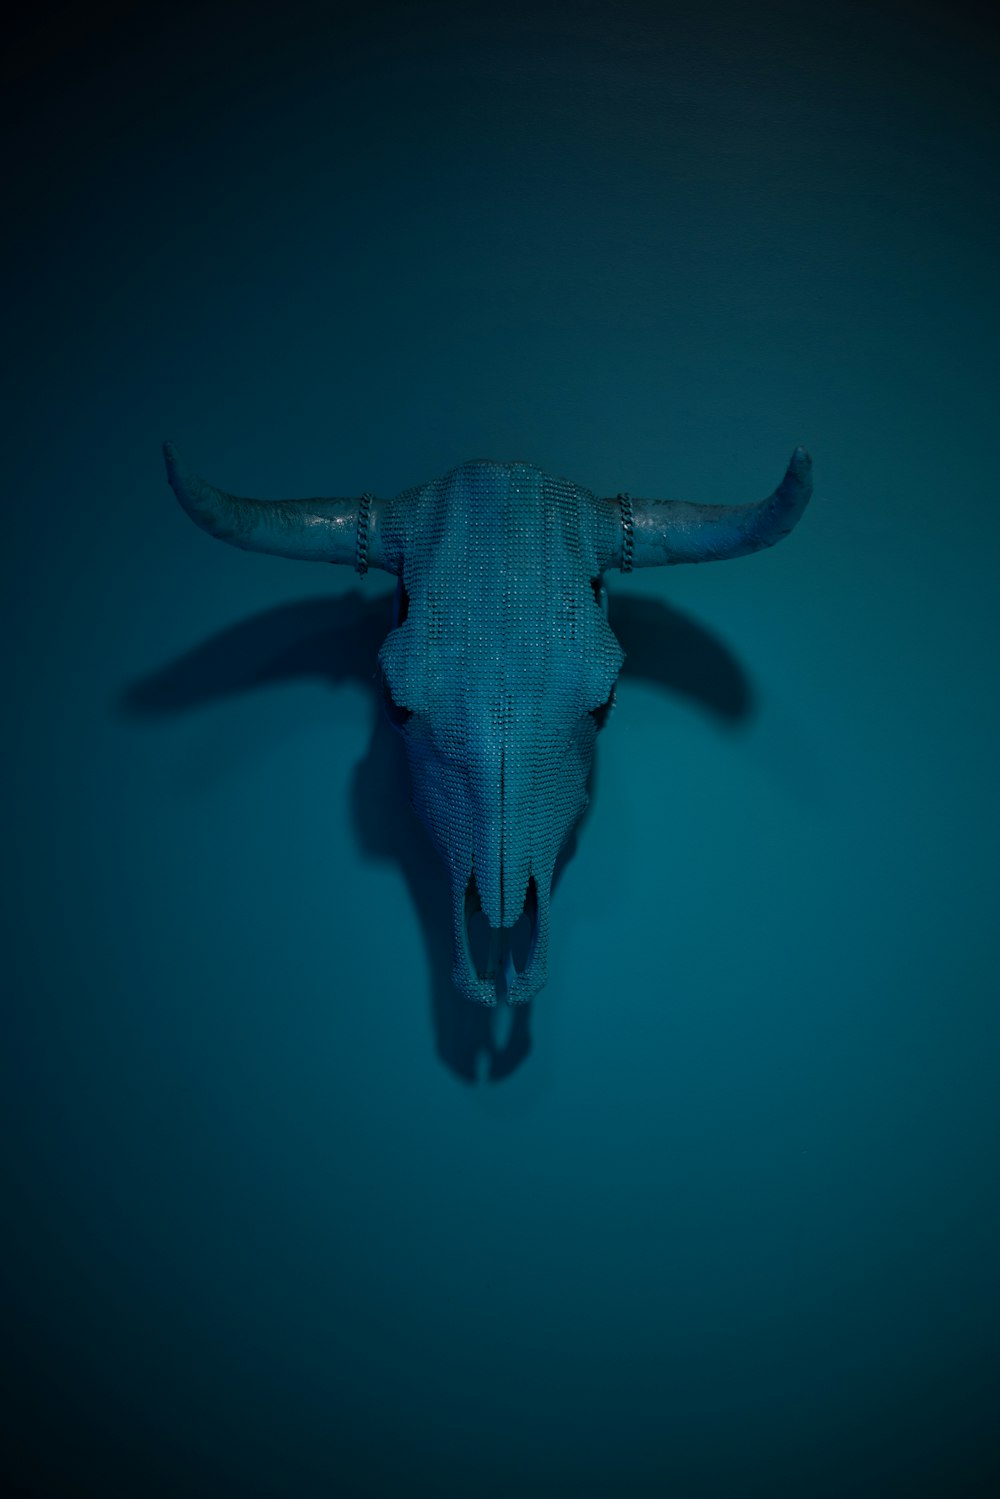 a bull's head is shown in the middle of a dark blue background